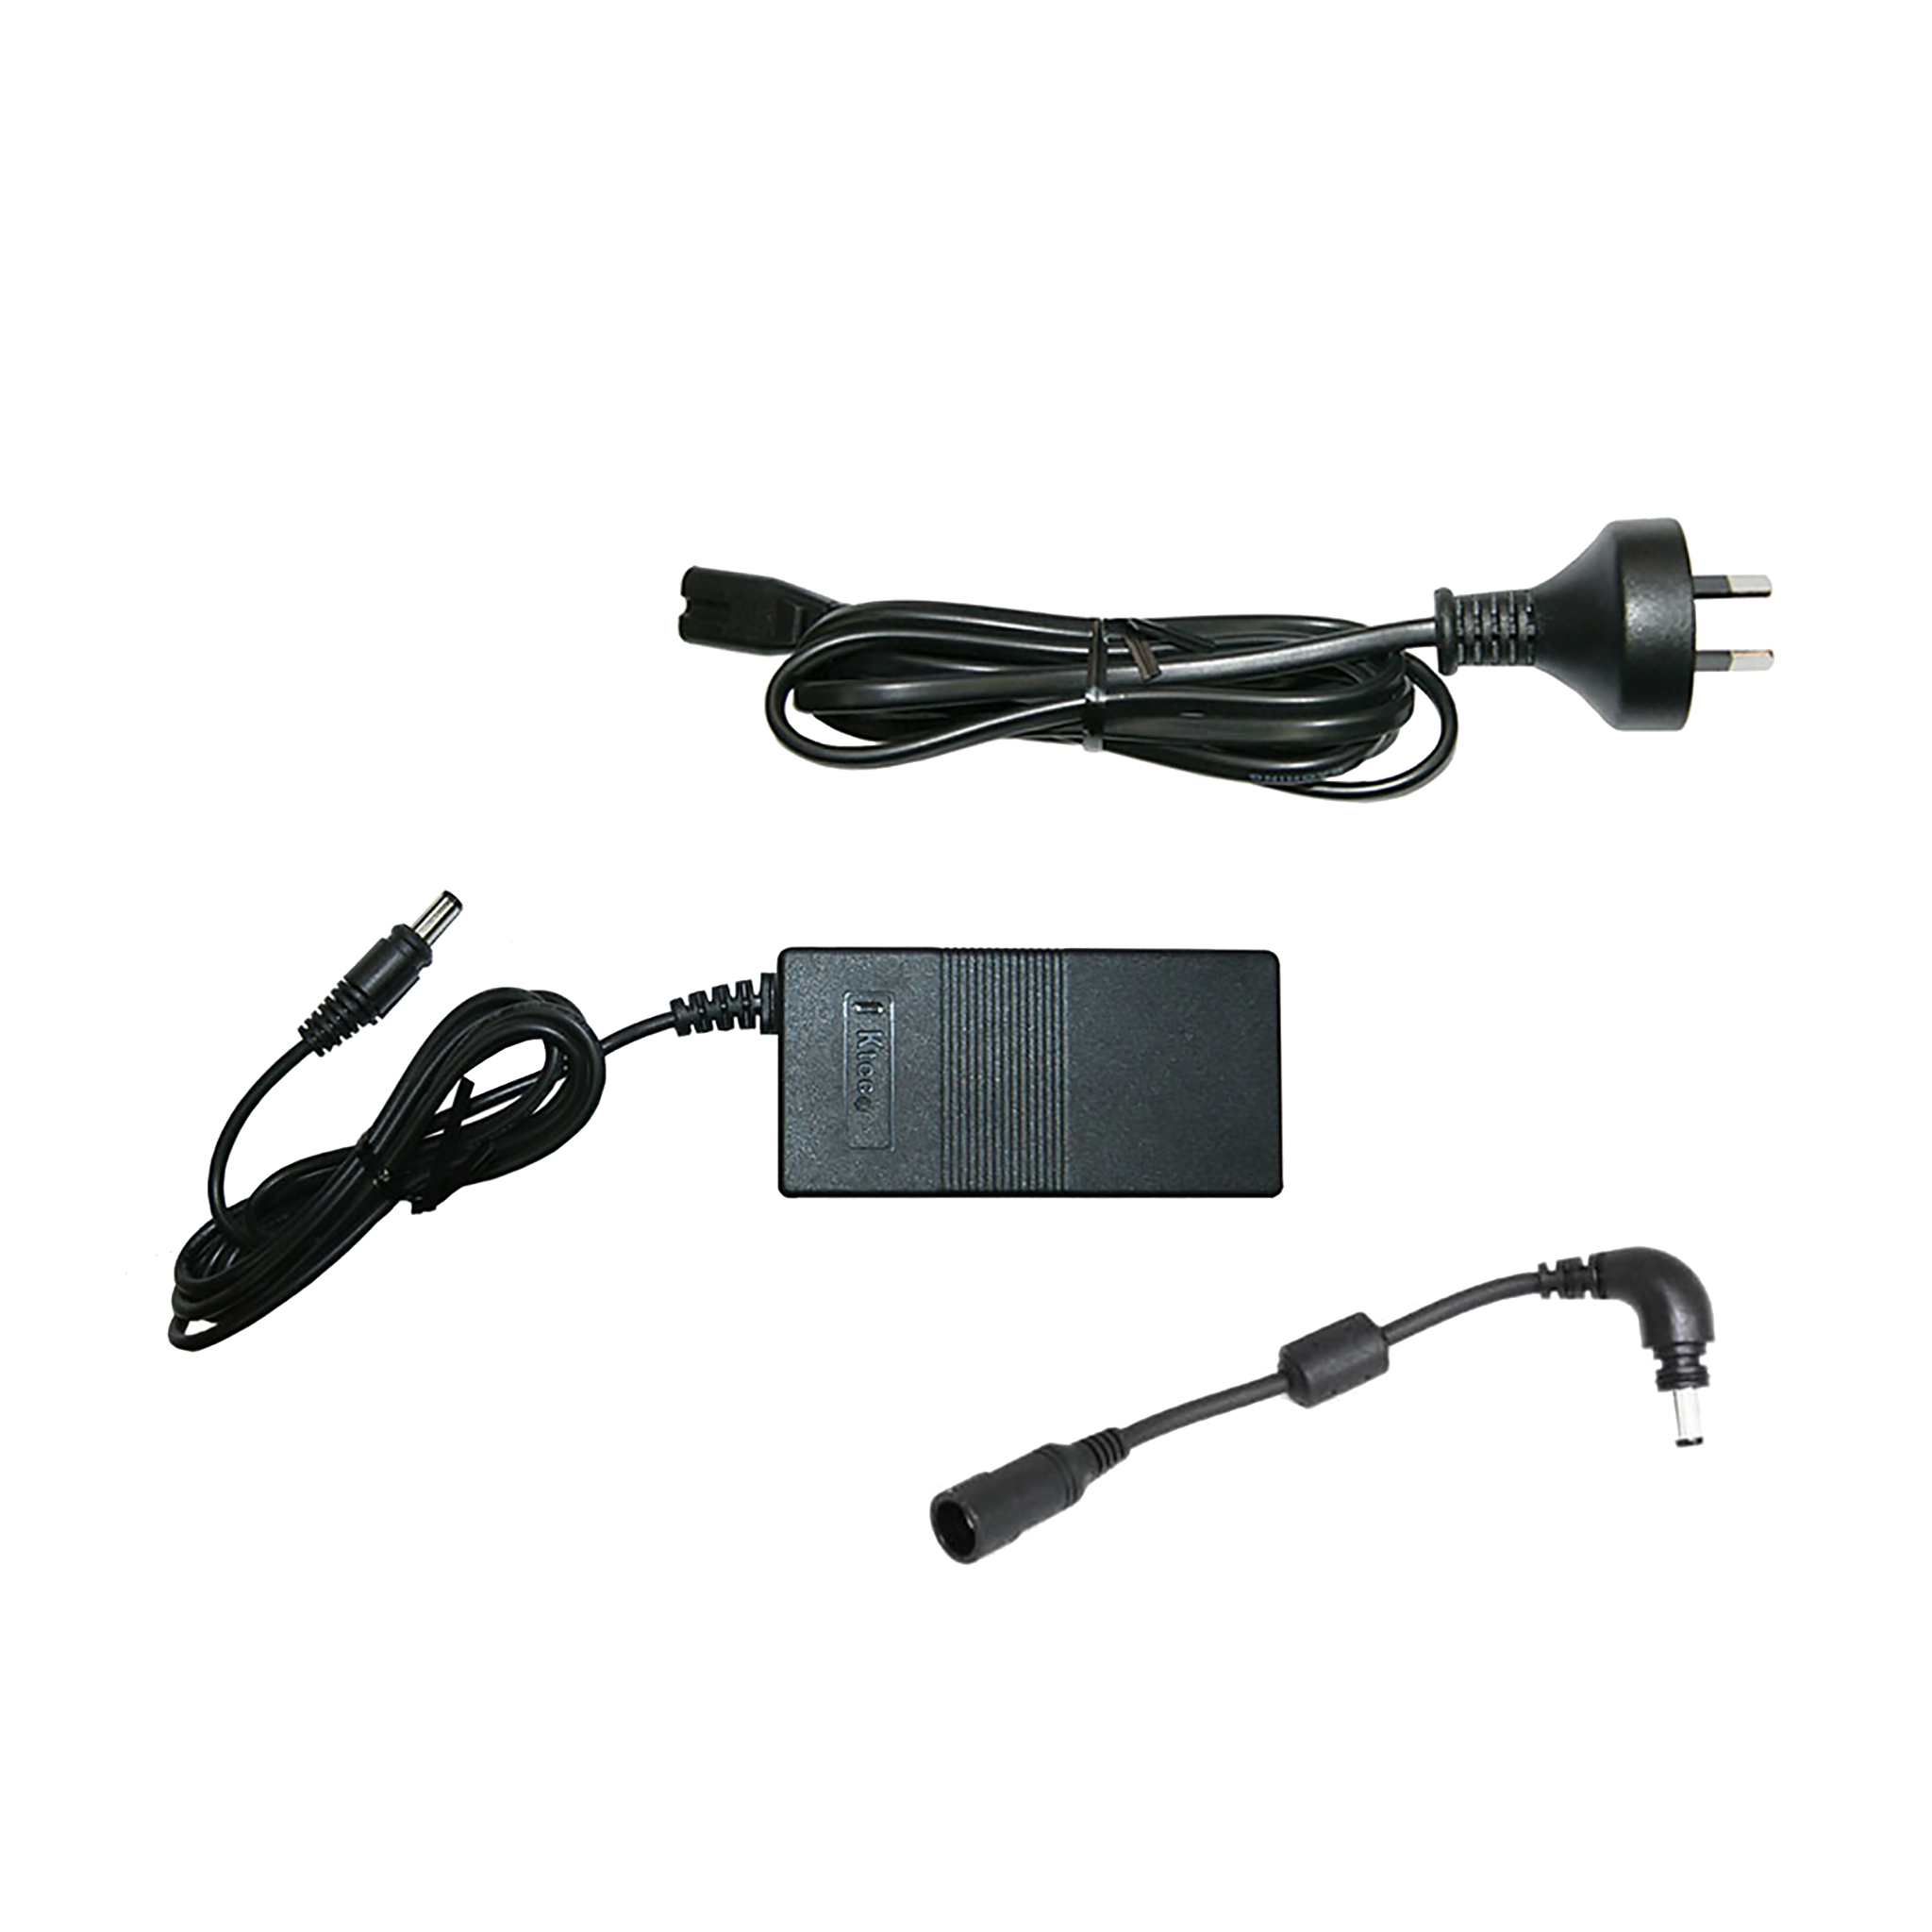 Charging Bundle | Charging set for XEO19R | Adaptor Cable, Power Plug & Power Supply